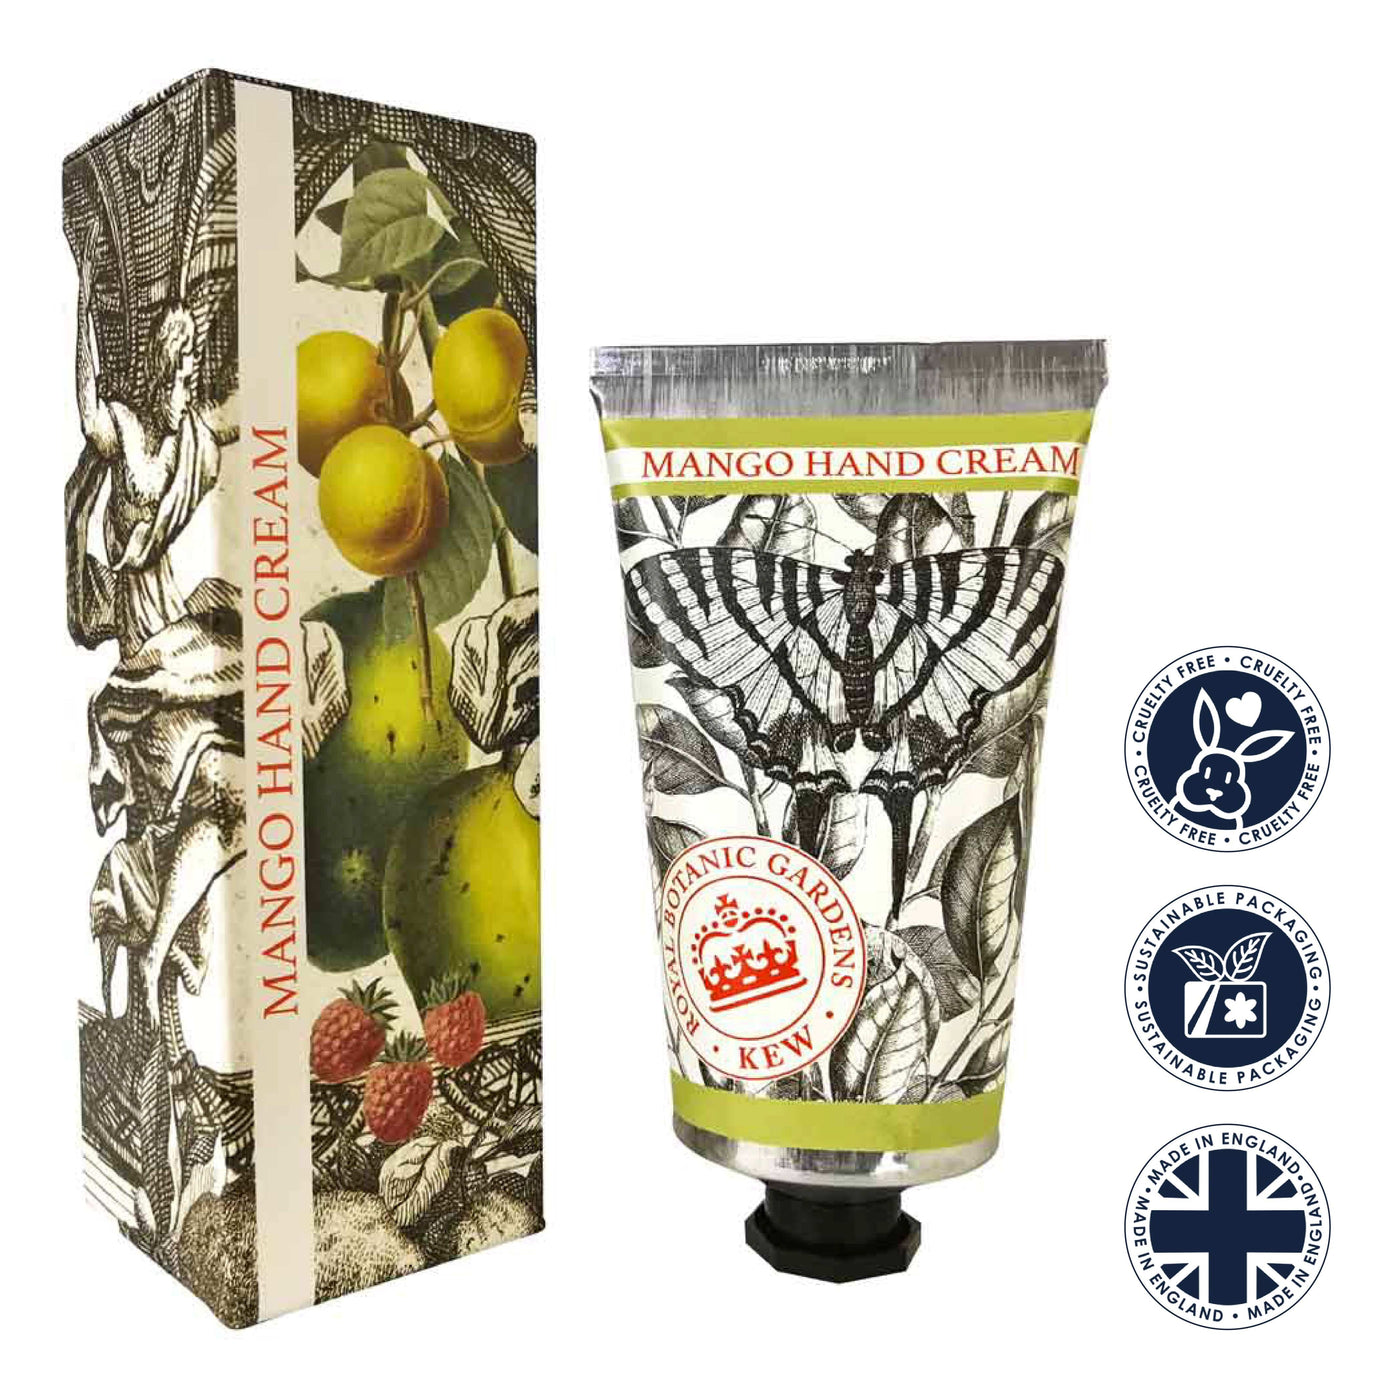 Kew Gardens Mango Hand Cream 75ml from our Hand Cream collection by The English Soap Company